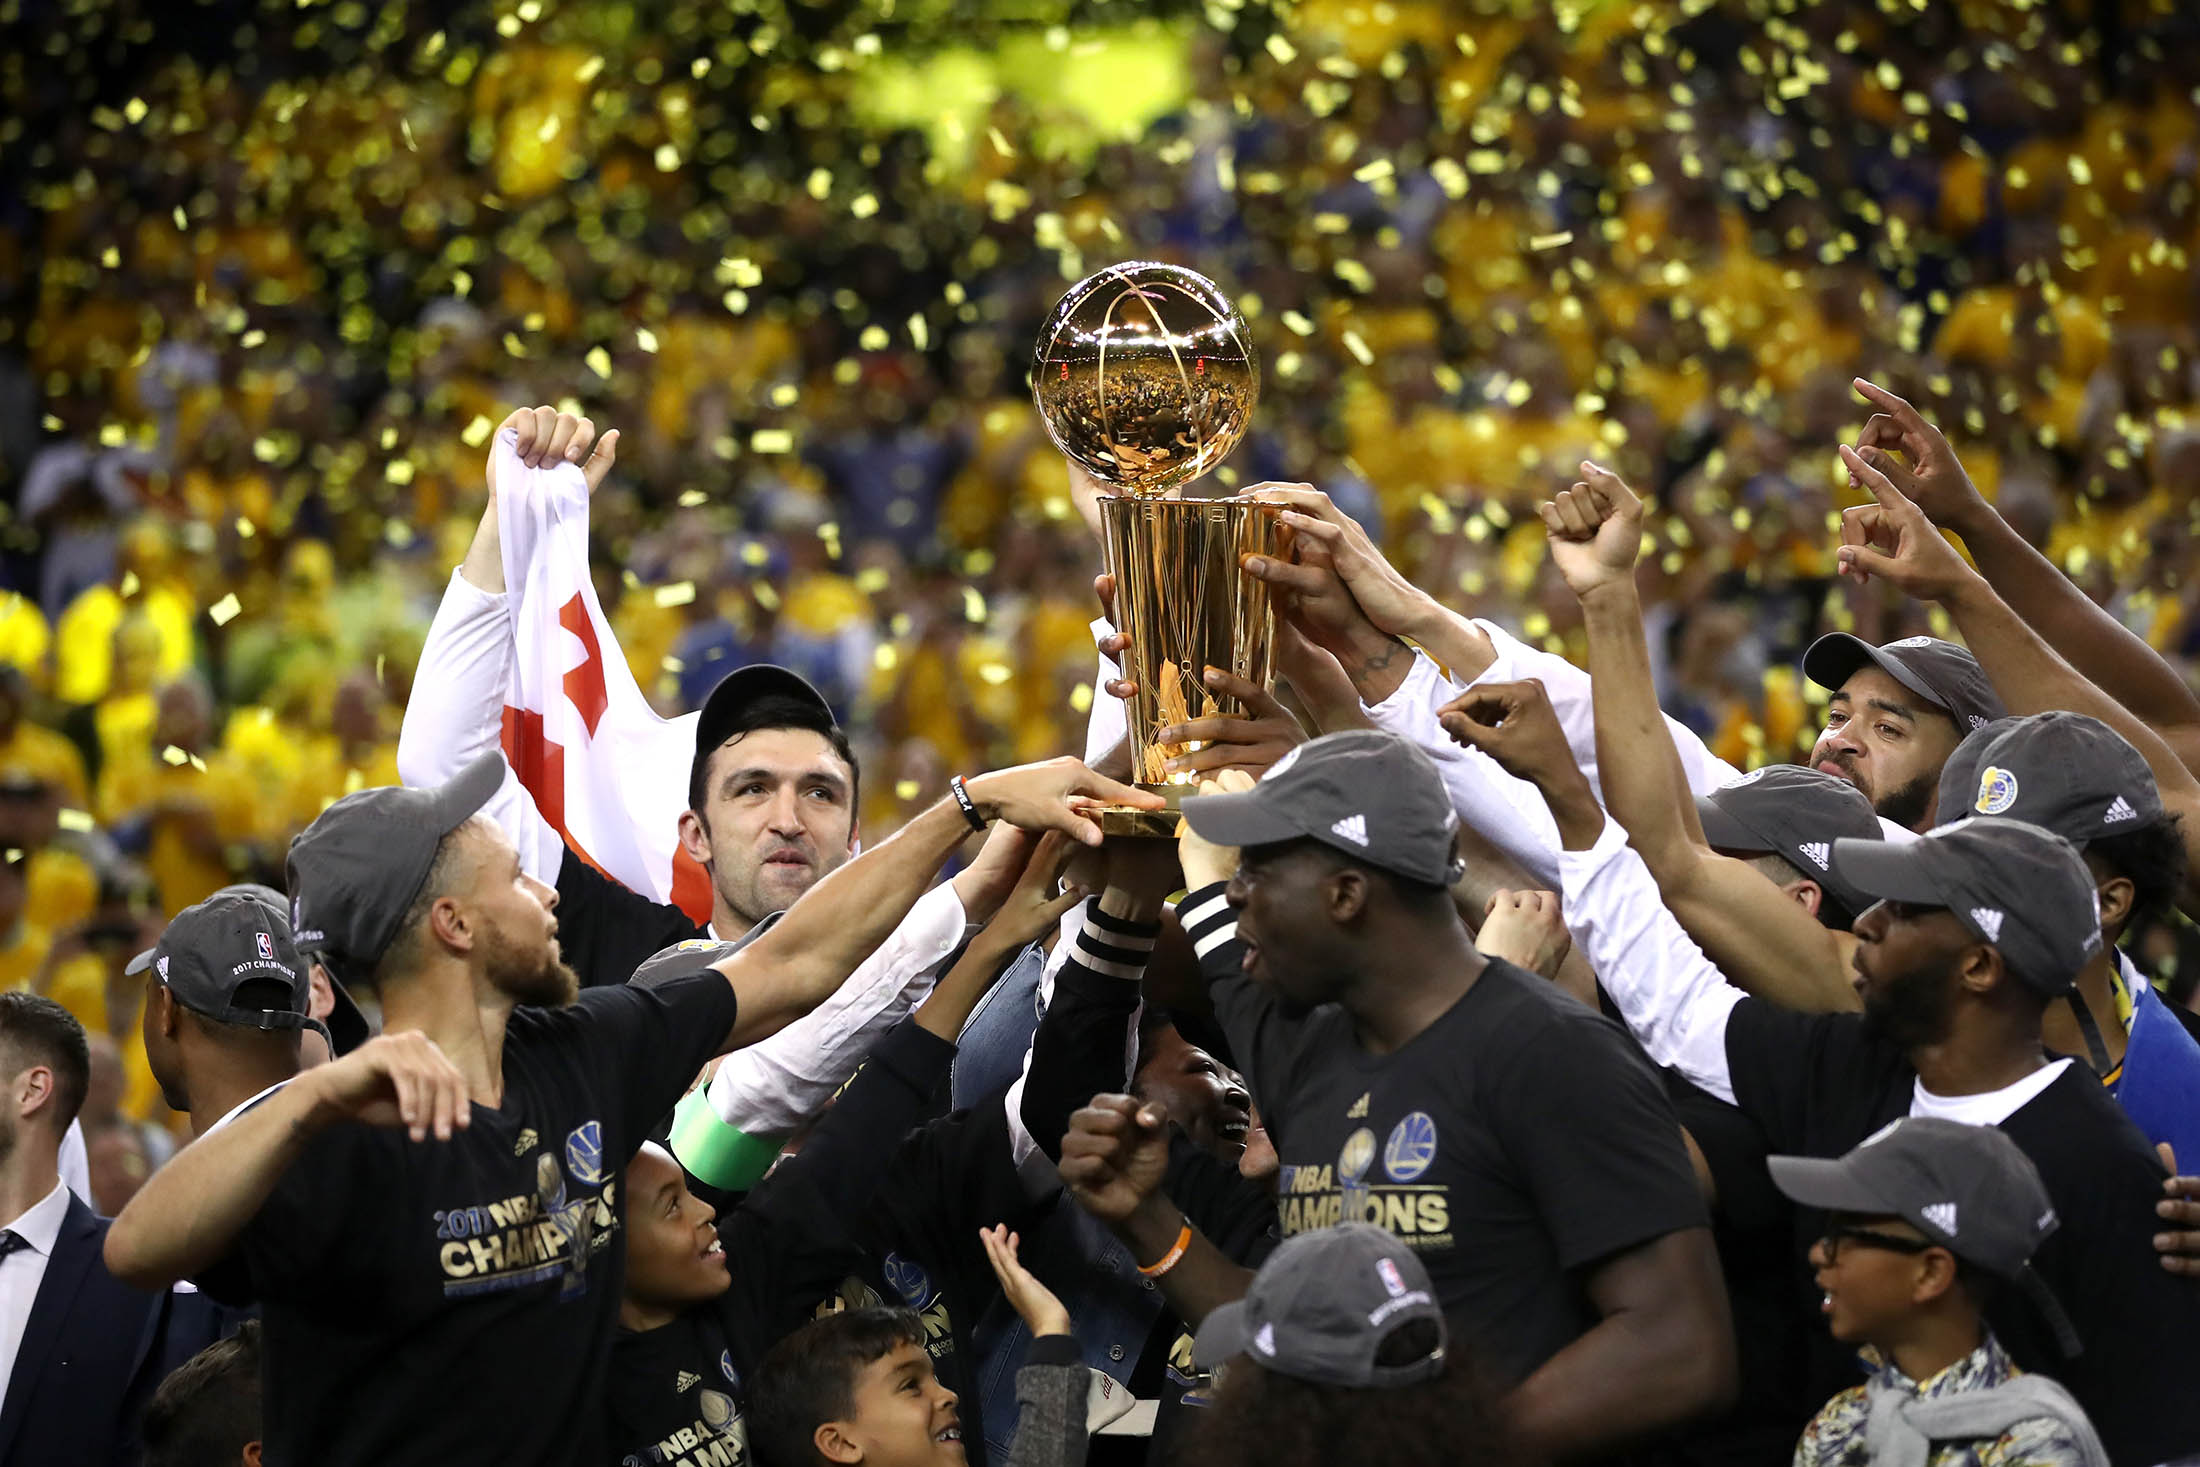 Golden State Warriors fans race to buy NBA Championship gear